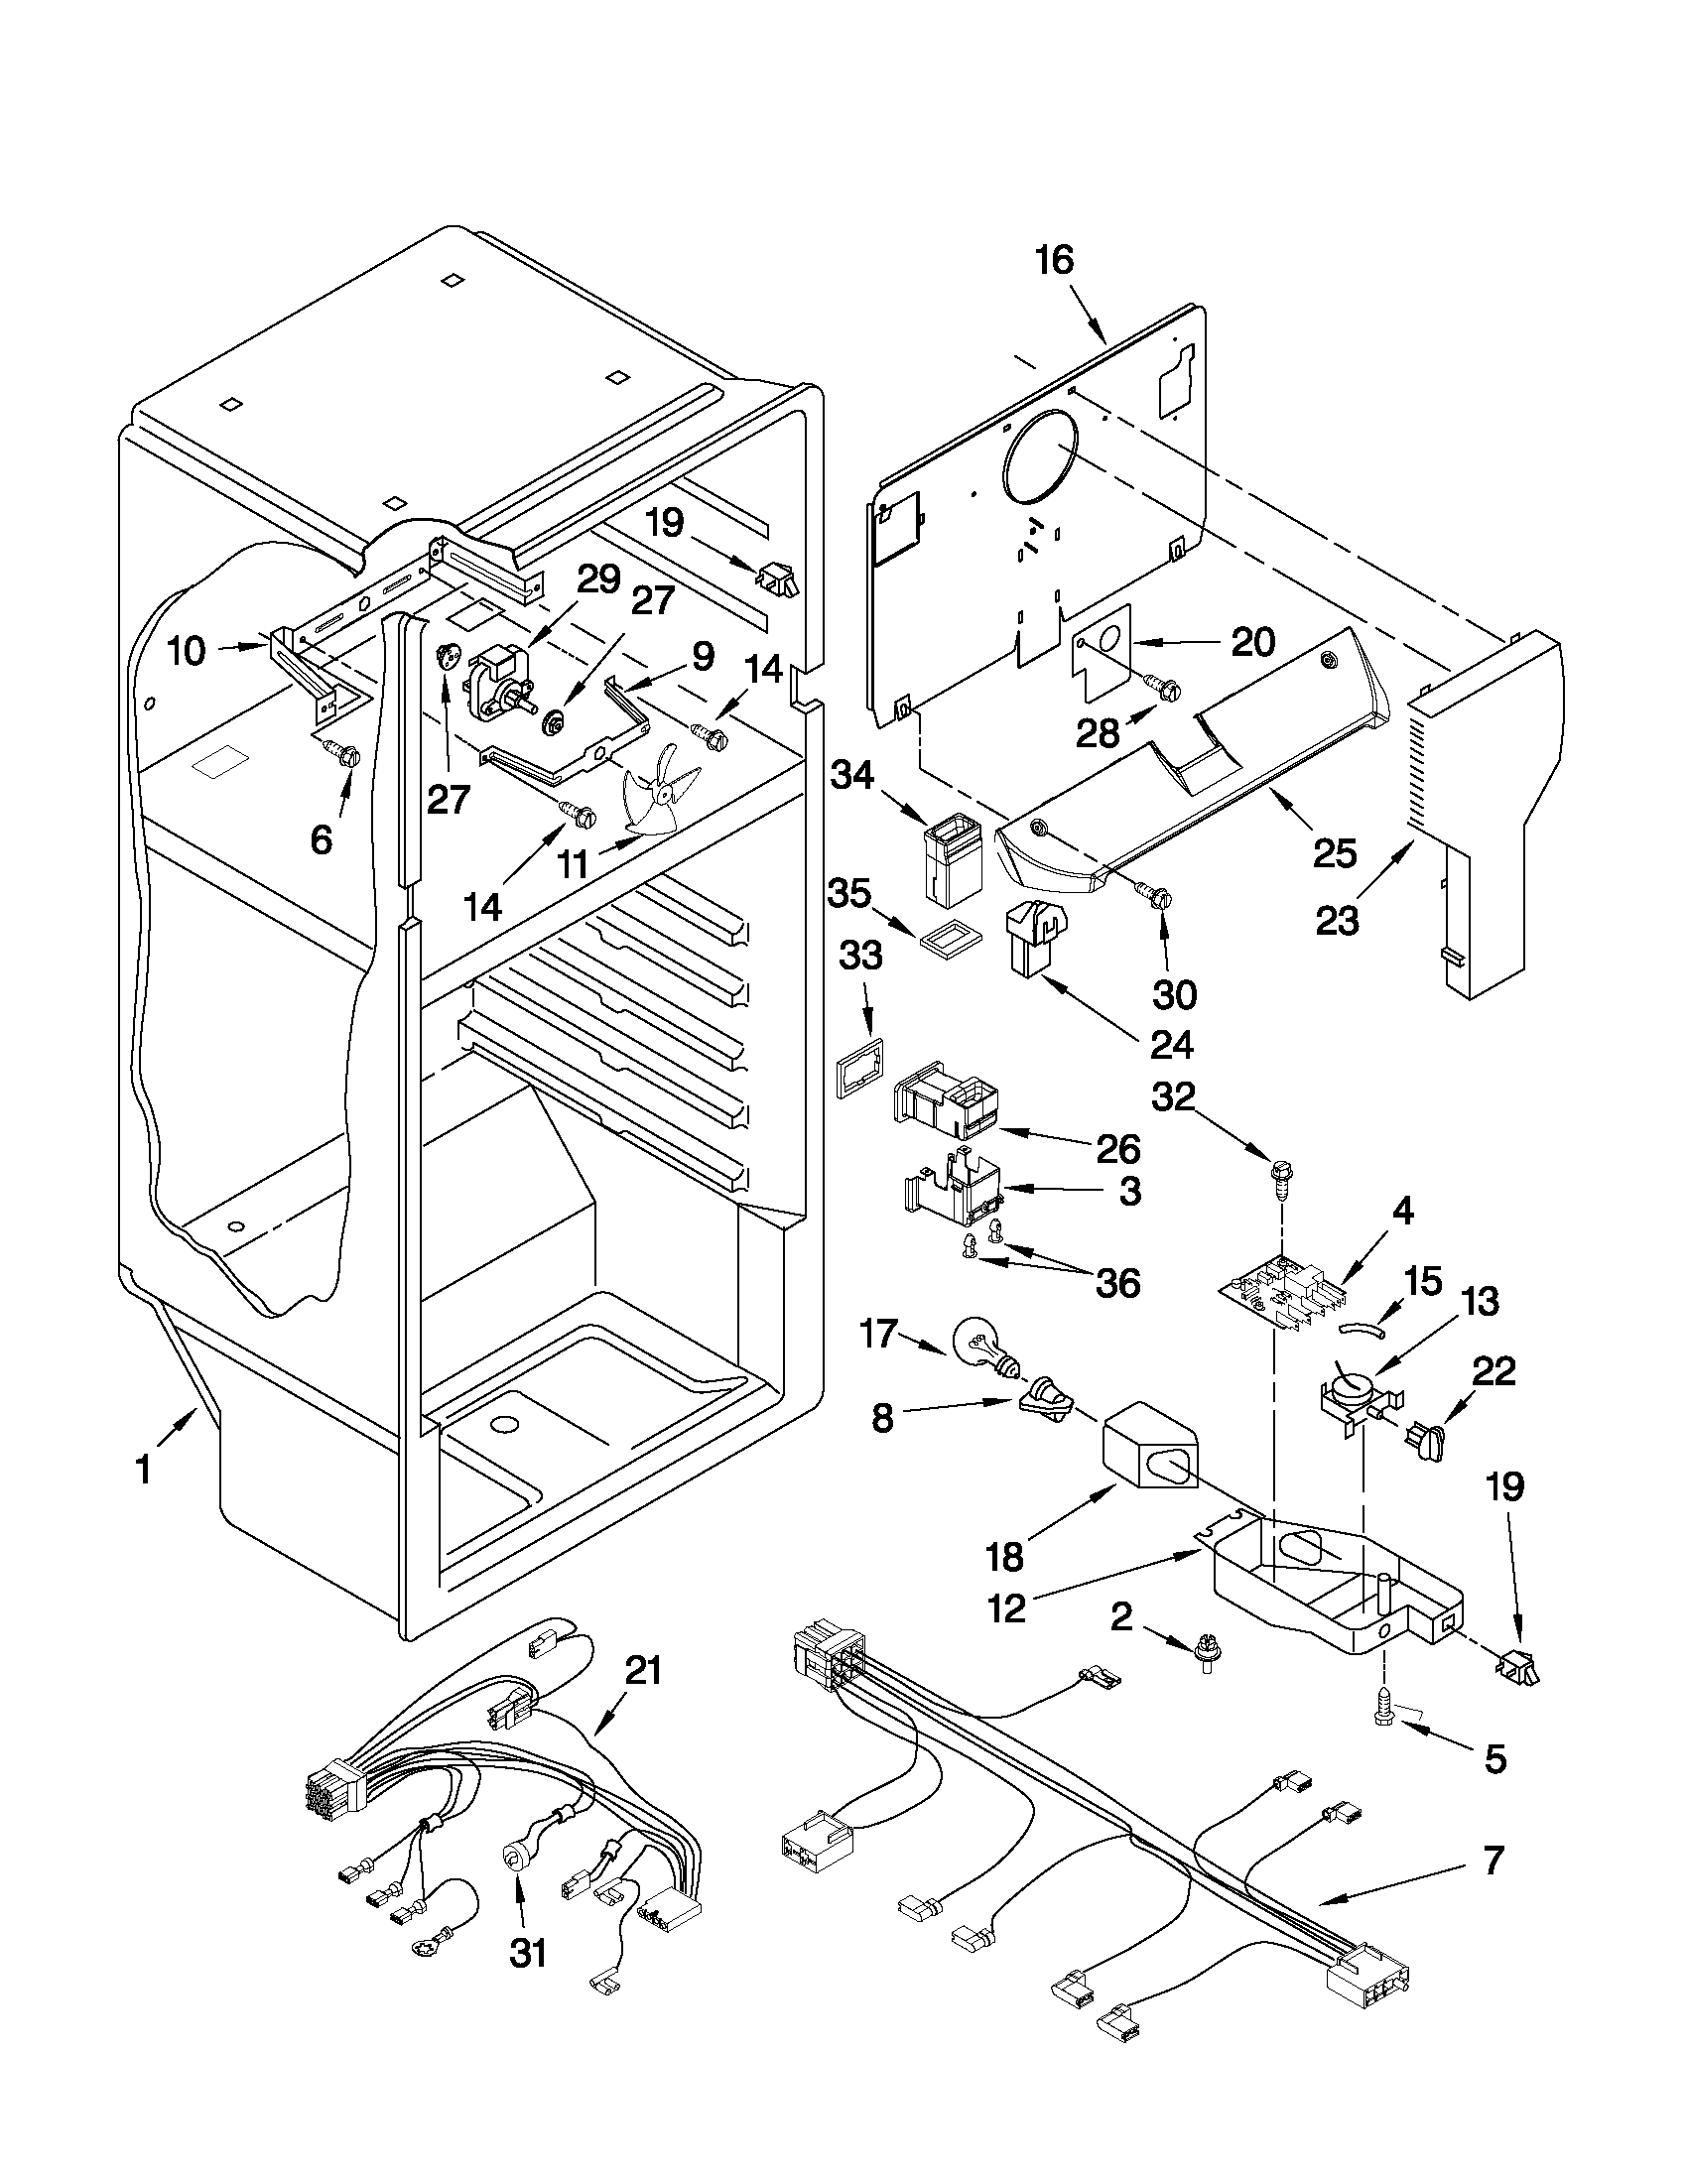 Whirlpool Refrigerator Parts Diagram Looking For Whirlpool Model W8rxngmwl01 Top Mount Refrigerator